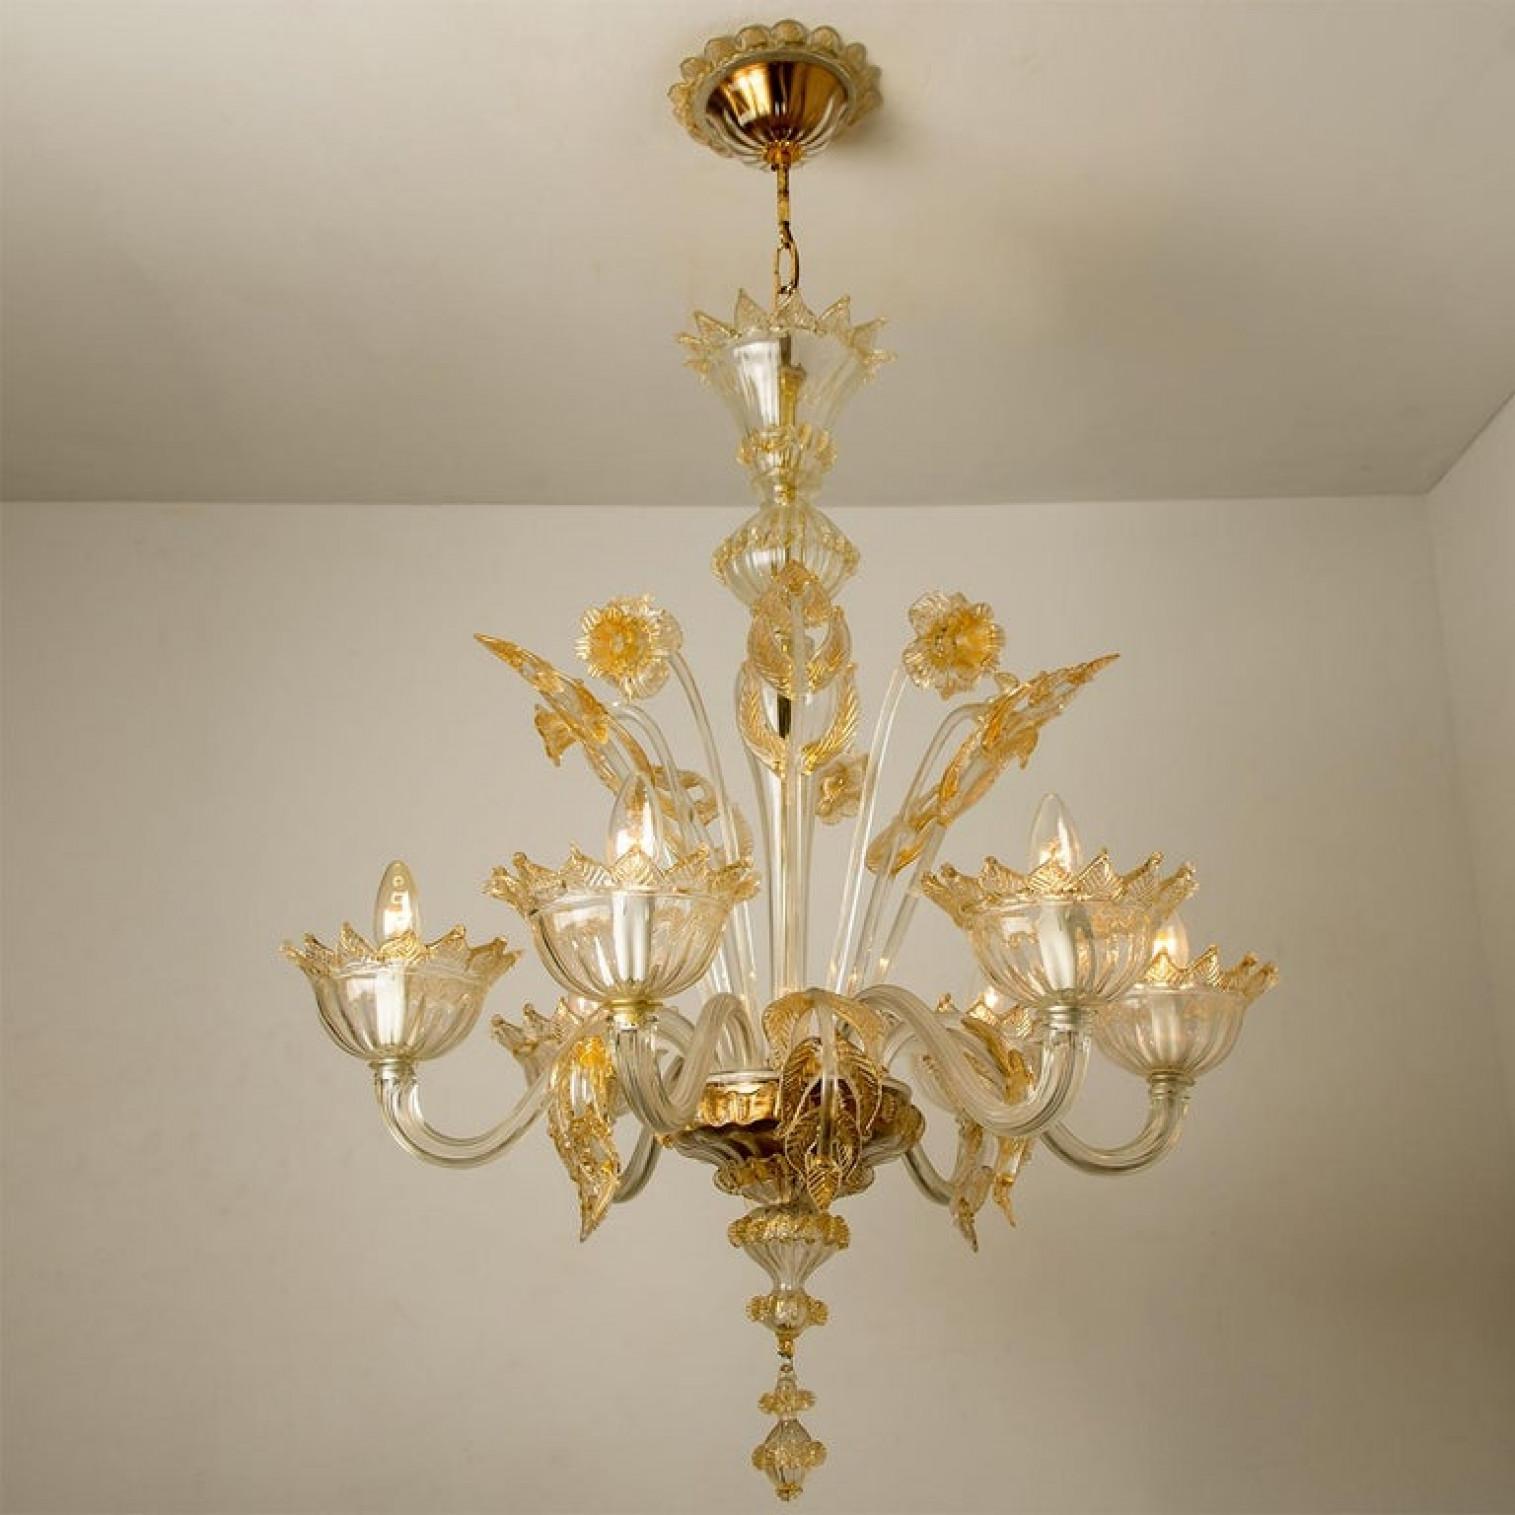 Large Venetian Chandelier in Gilded Murano Glass, by Barovier, 1950s For Sale 6